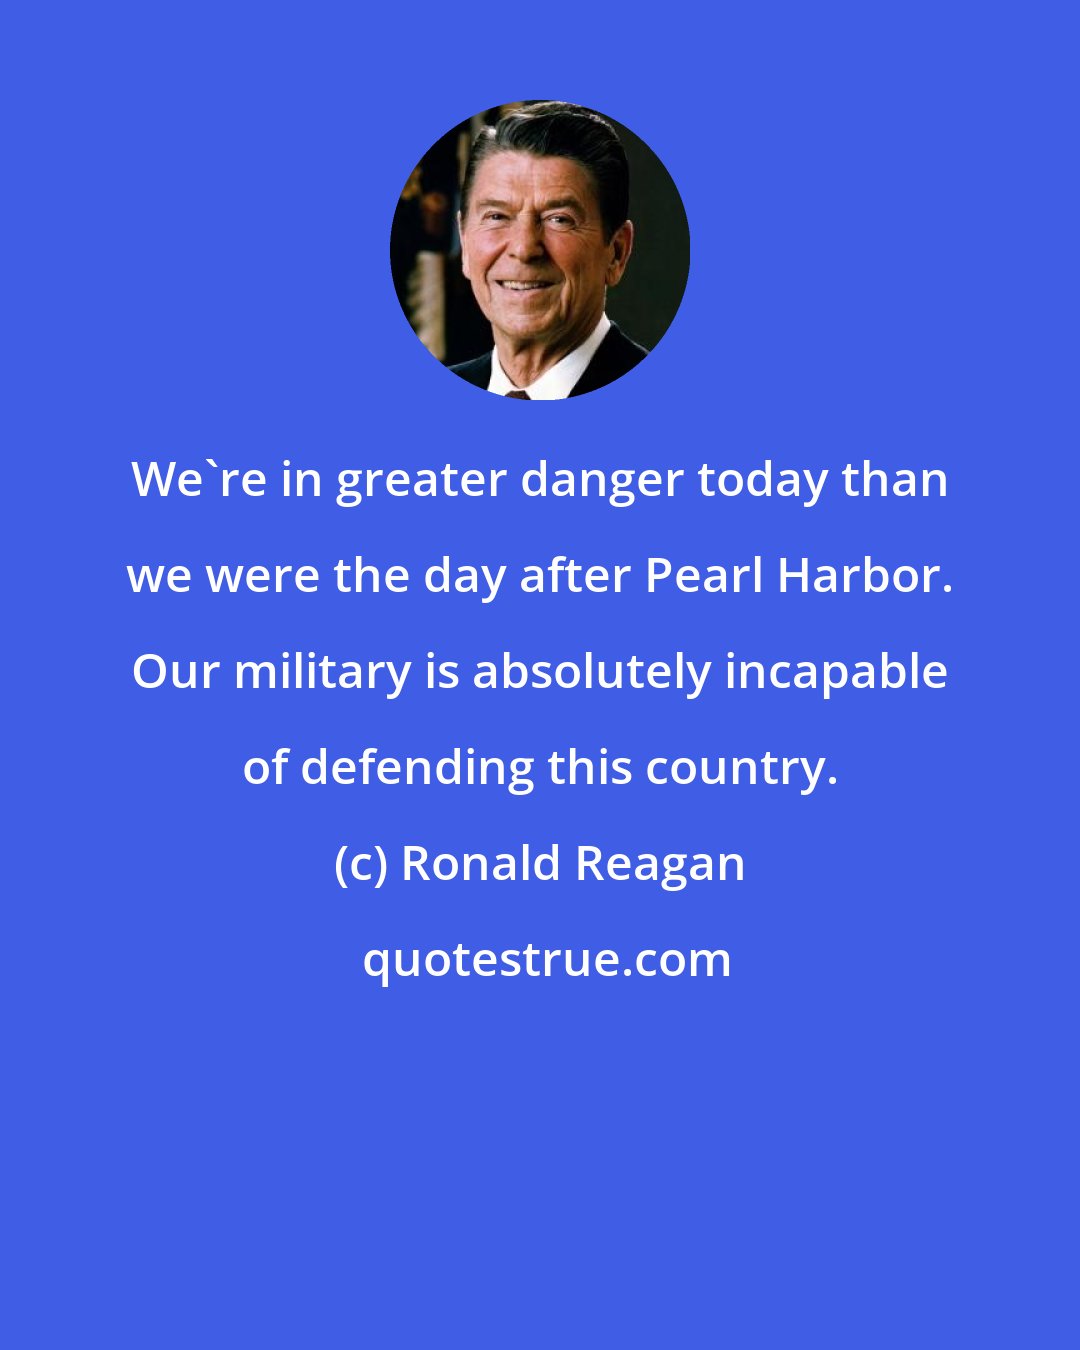 Ronald Reagan: We're in greater danger today than we were the day after Pearl Harbor. Our military is absolutely incapable of defending this country.